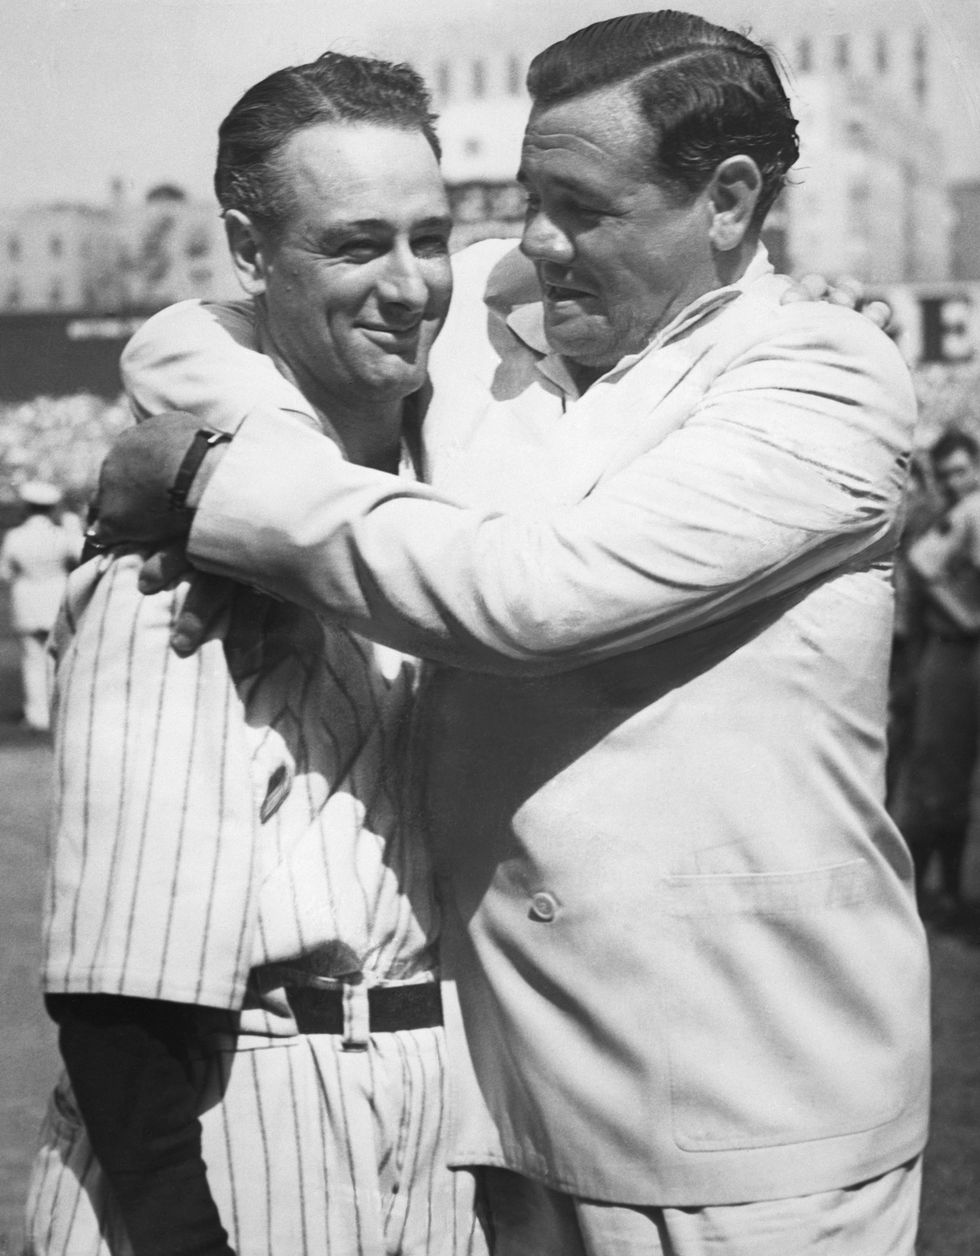 Babe Ruth greets his former teammate Lou Gehrig on the occasion of "Lou Gehrig Day" at Yankee Stadium, during a ceremony honoring the non-playing Captain of the Yankees, whose playing days have ended as a result of a diseased spine. The ceremony took place in between games of the New York Yankees-Washington Senators double header.